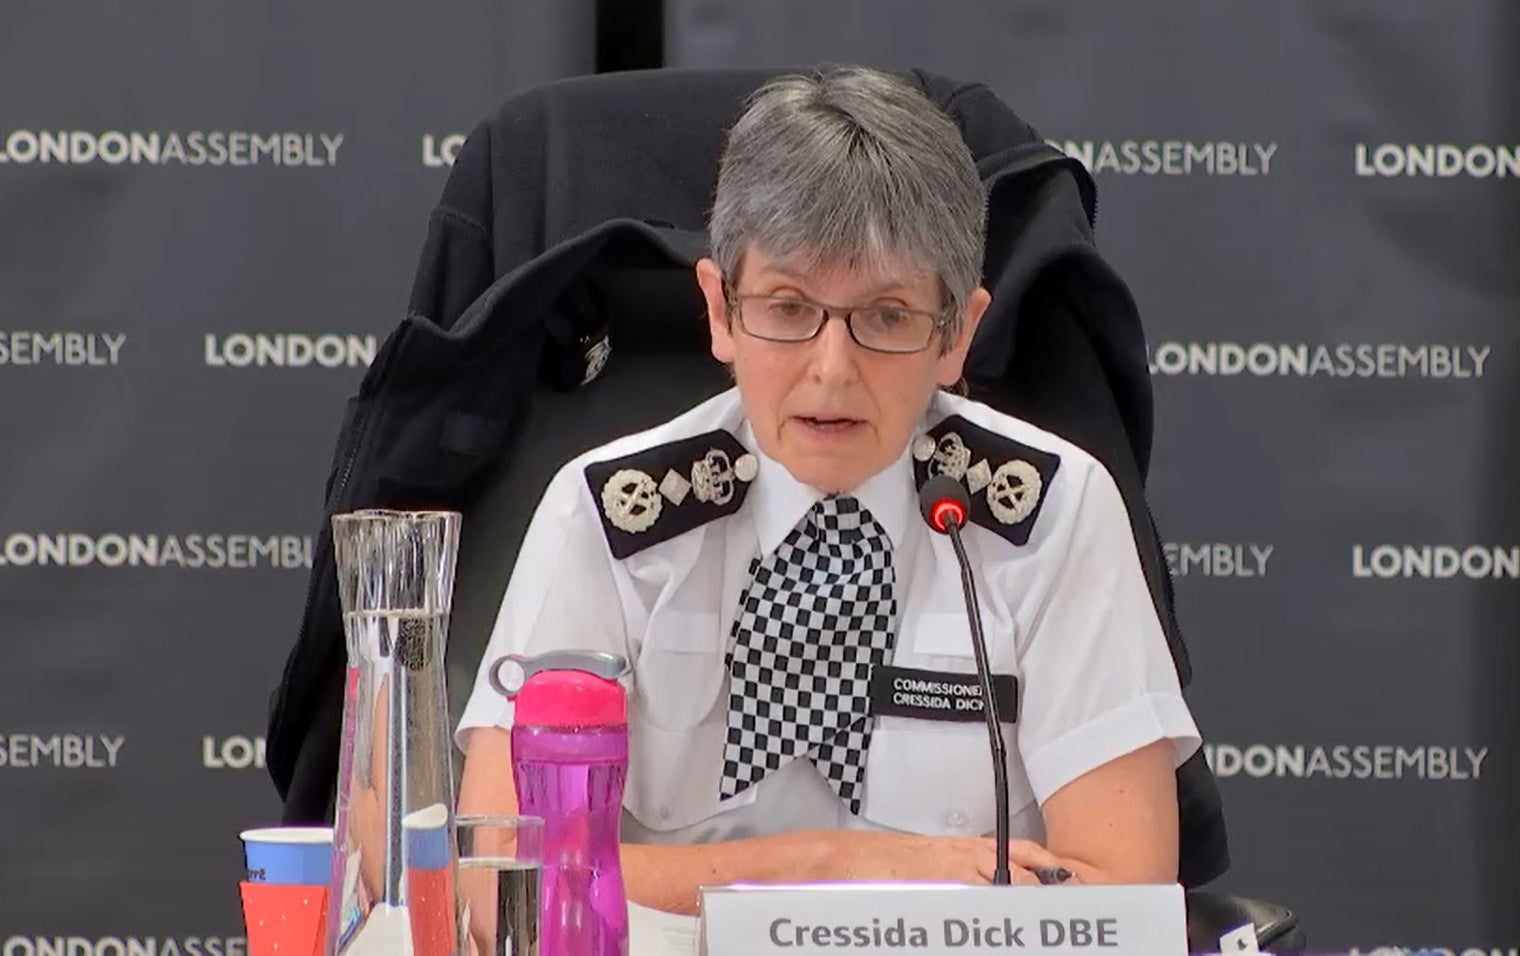 Today, Cressida Dick said that she thinks there is a strong case that the law has been broken